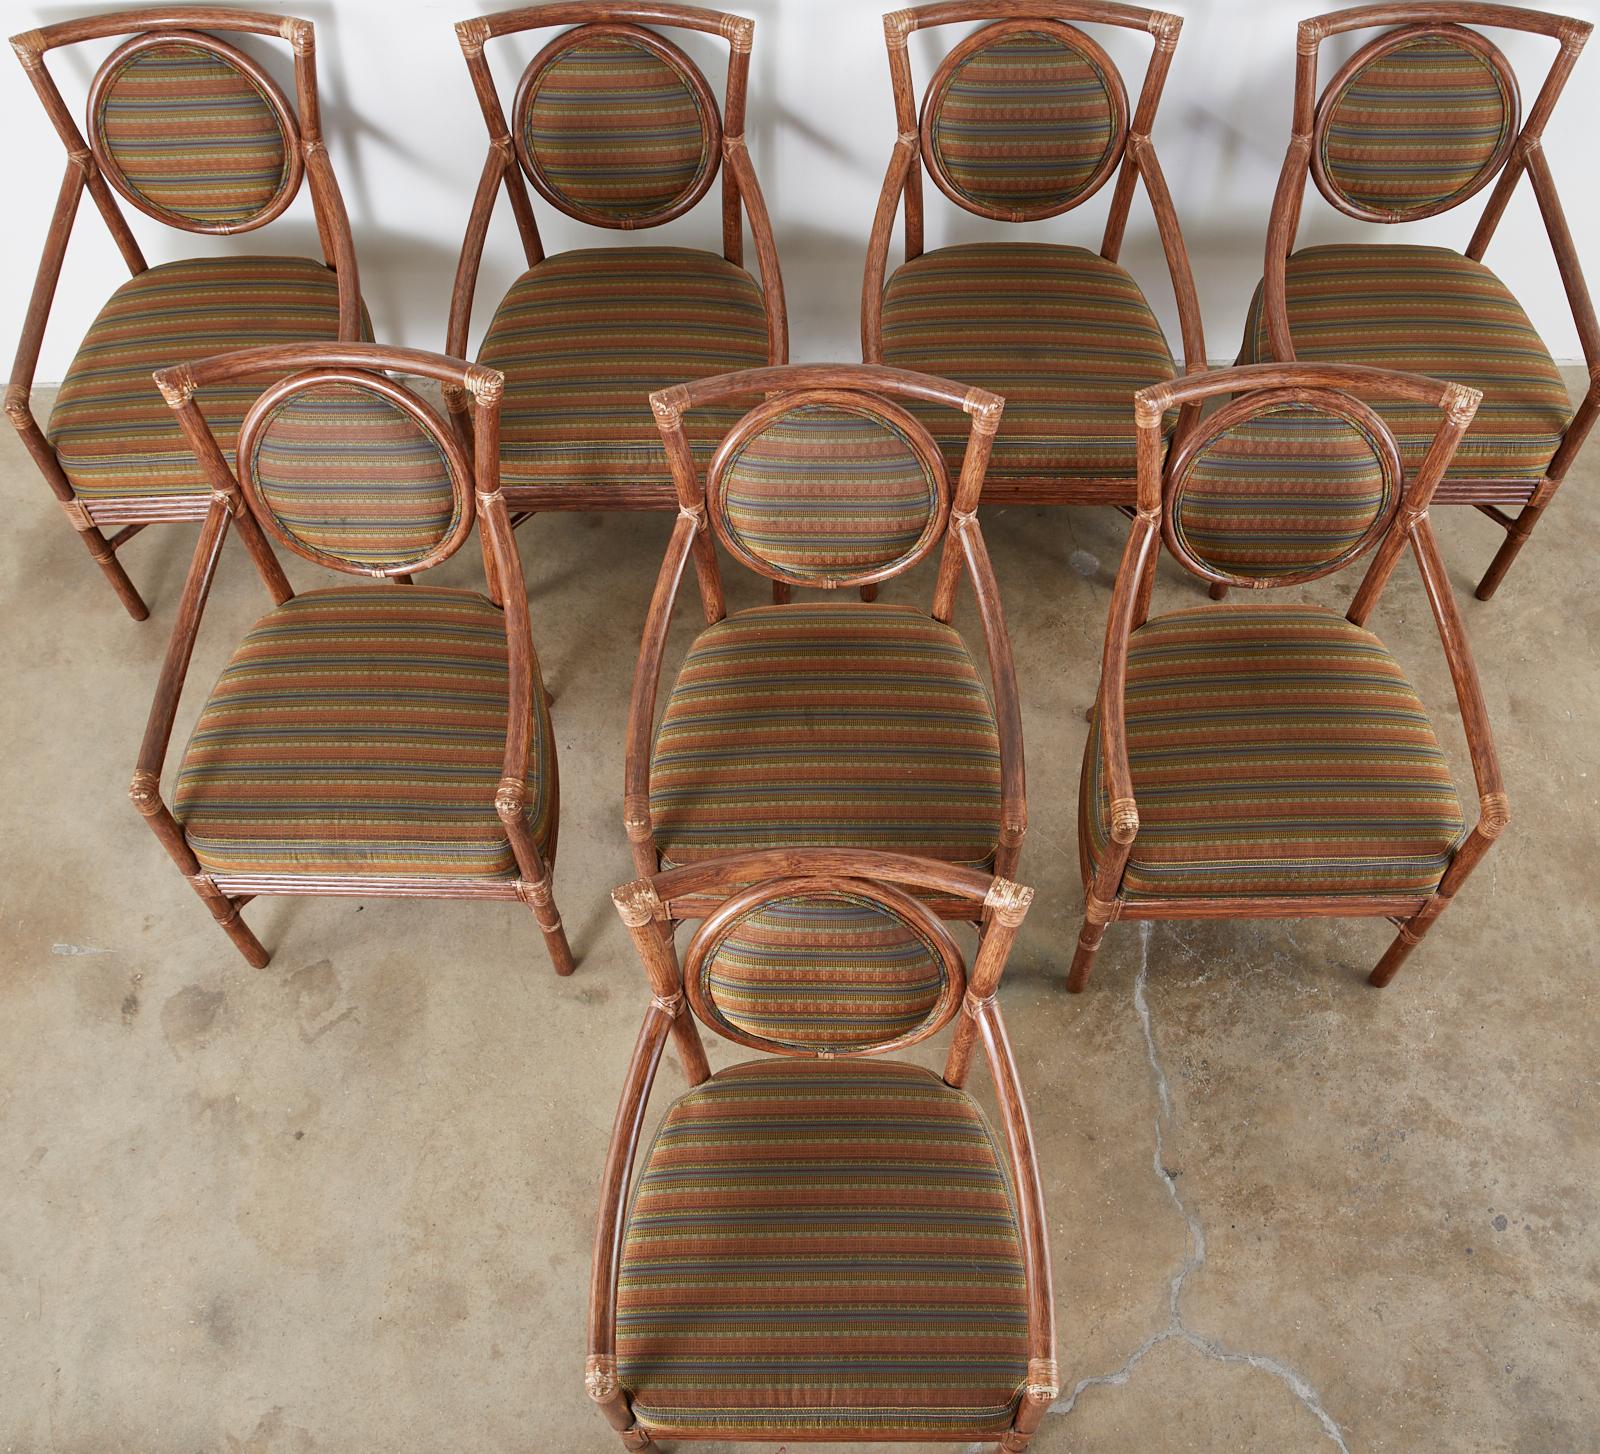 mcguire chairs for sale